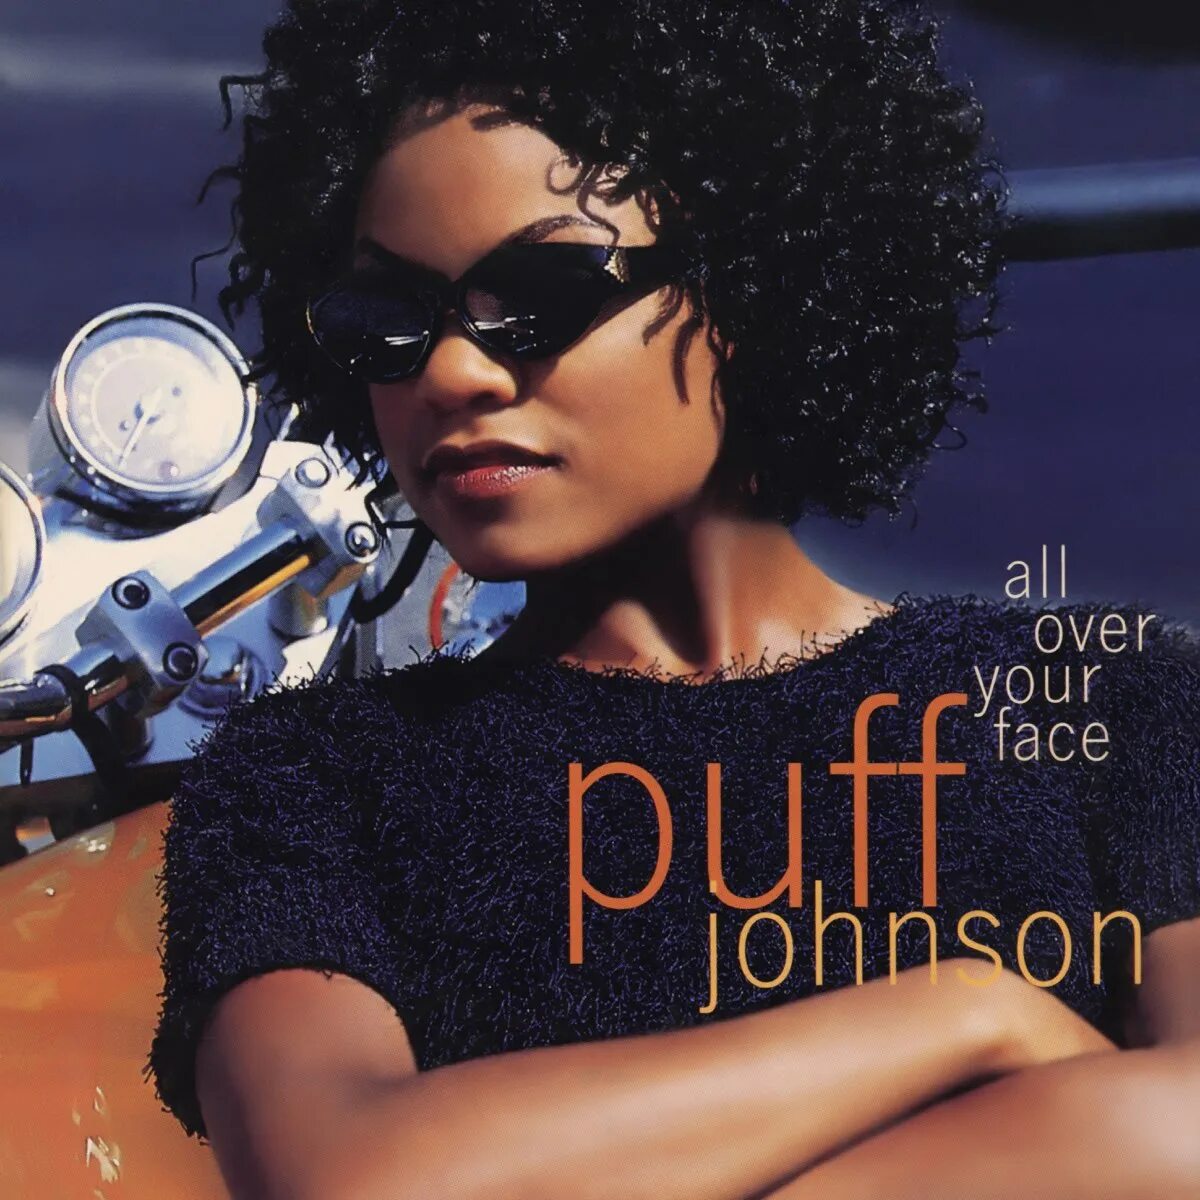 Puff Johnson. Puff музыка. All over your face. Обложки для mp3 фото Tamia - stranger in my House. This your песня